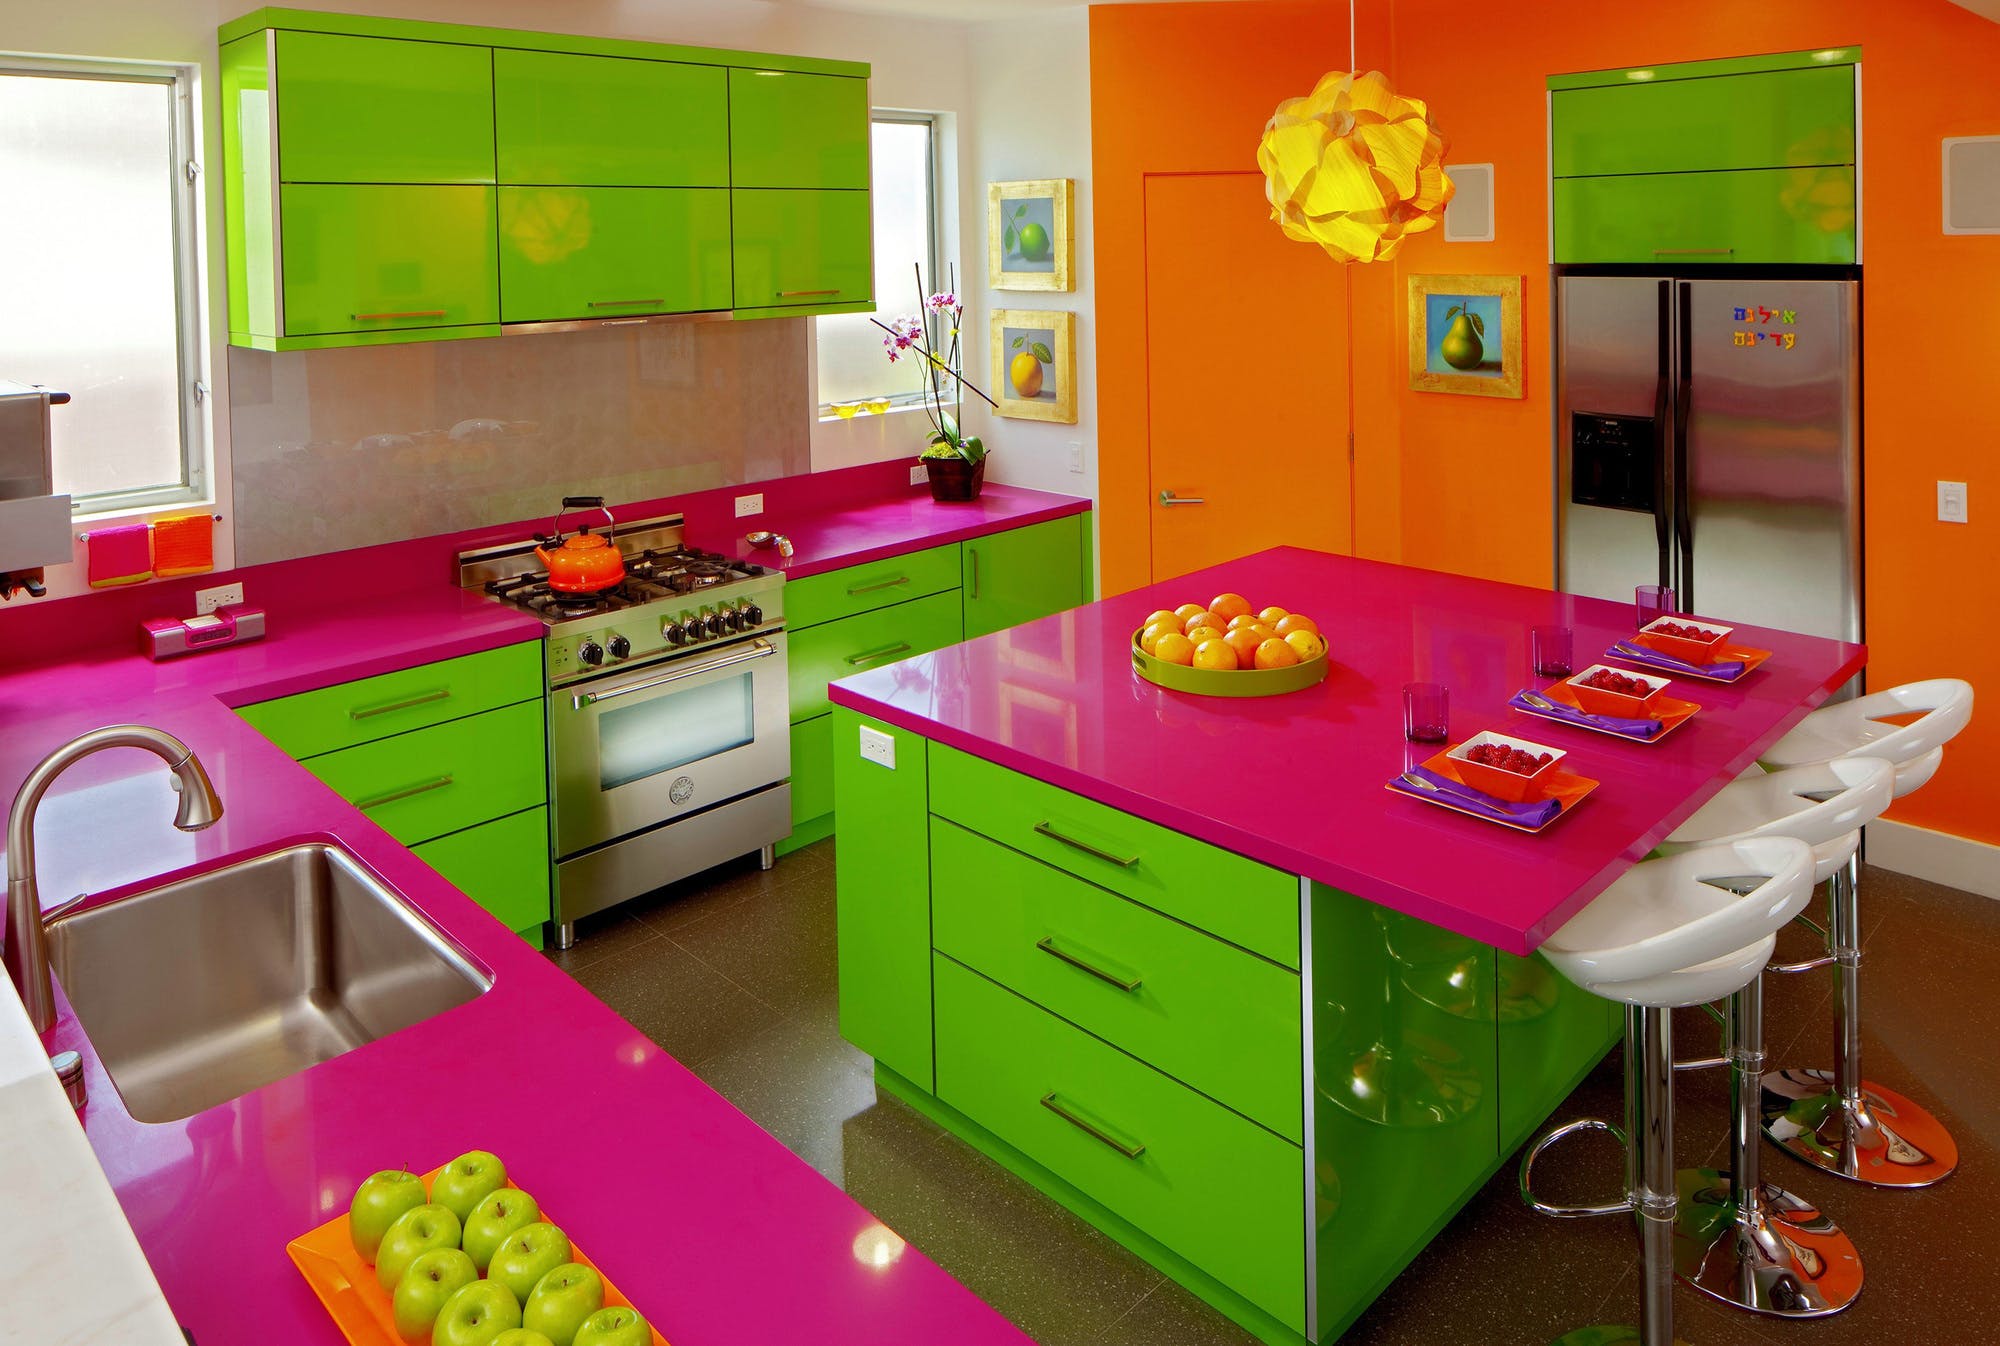 glossy colors in kitchen. 80+ Unusual Kitchen Design Ideas for Small Spaces - 33